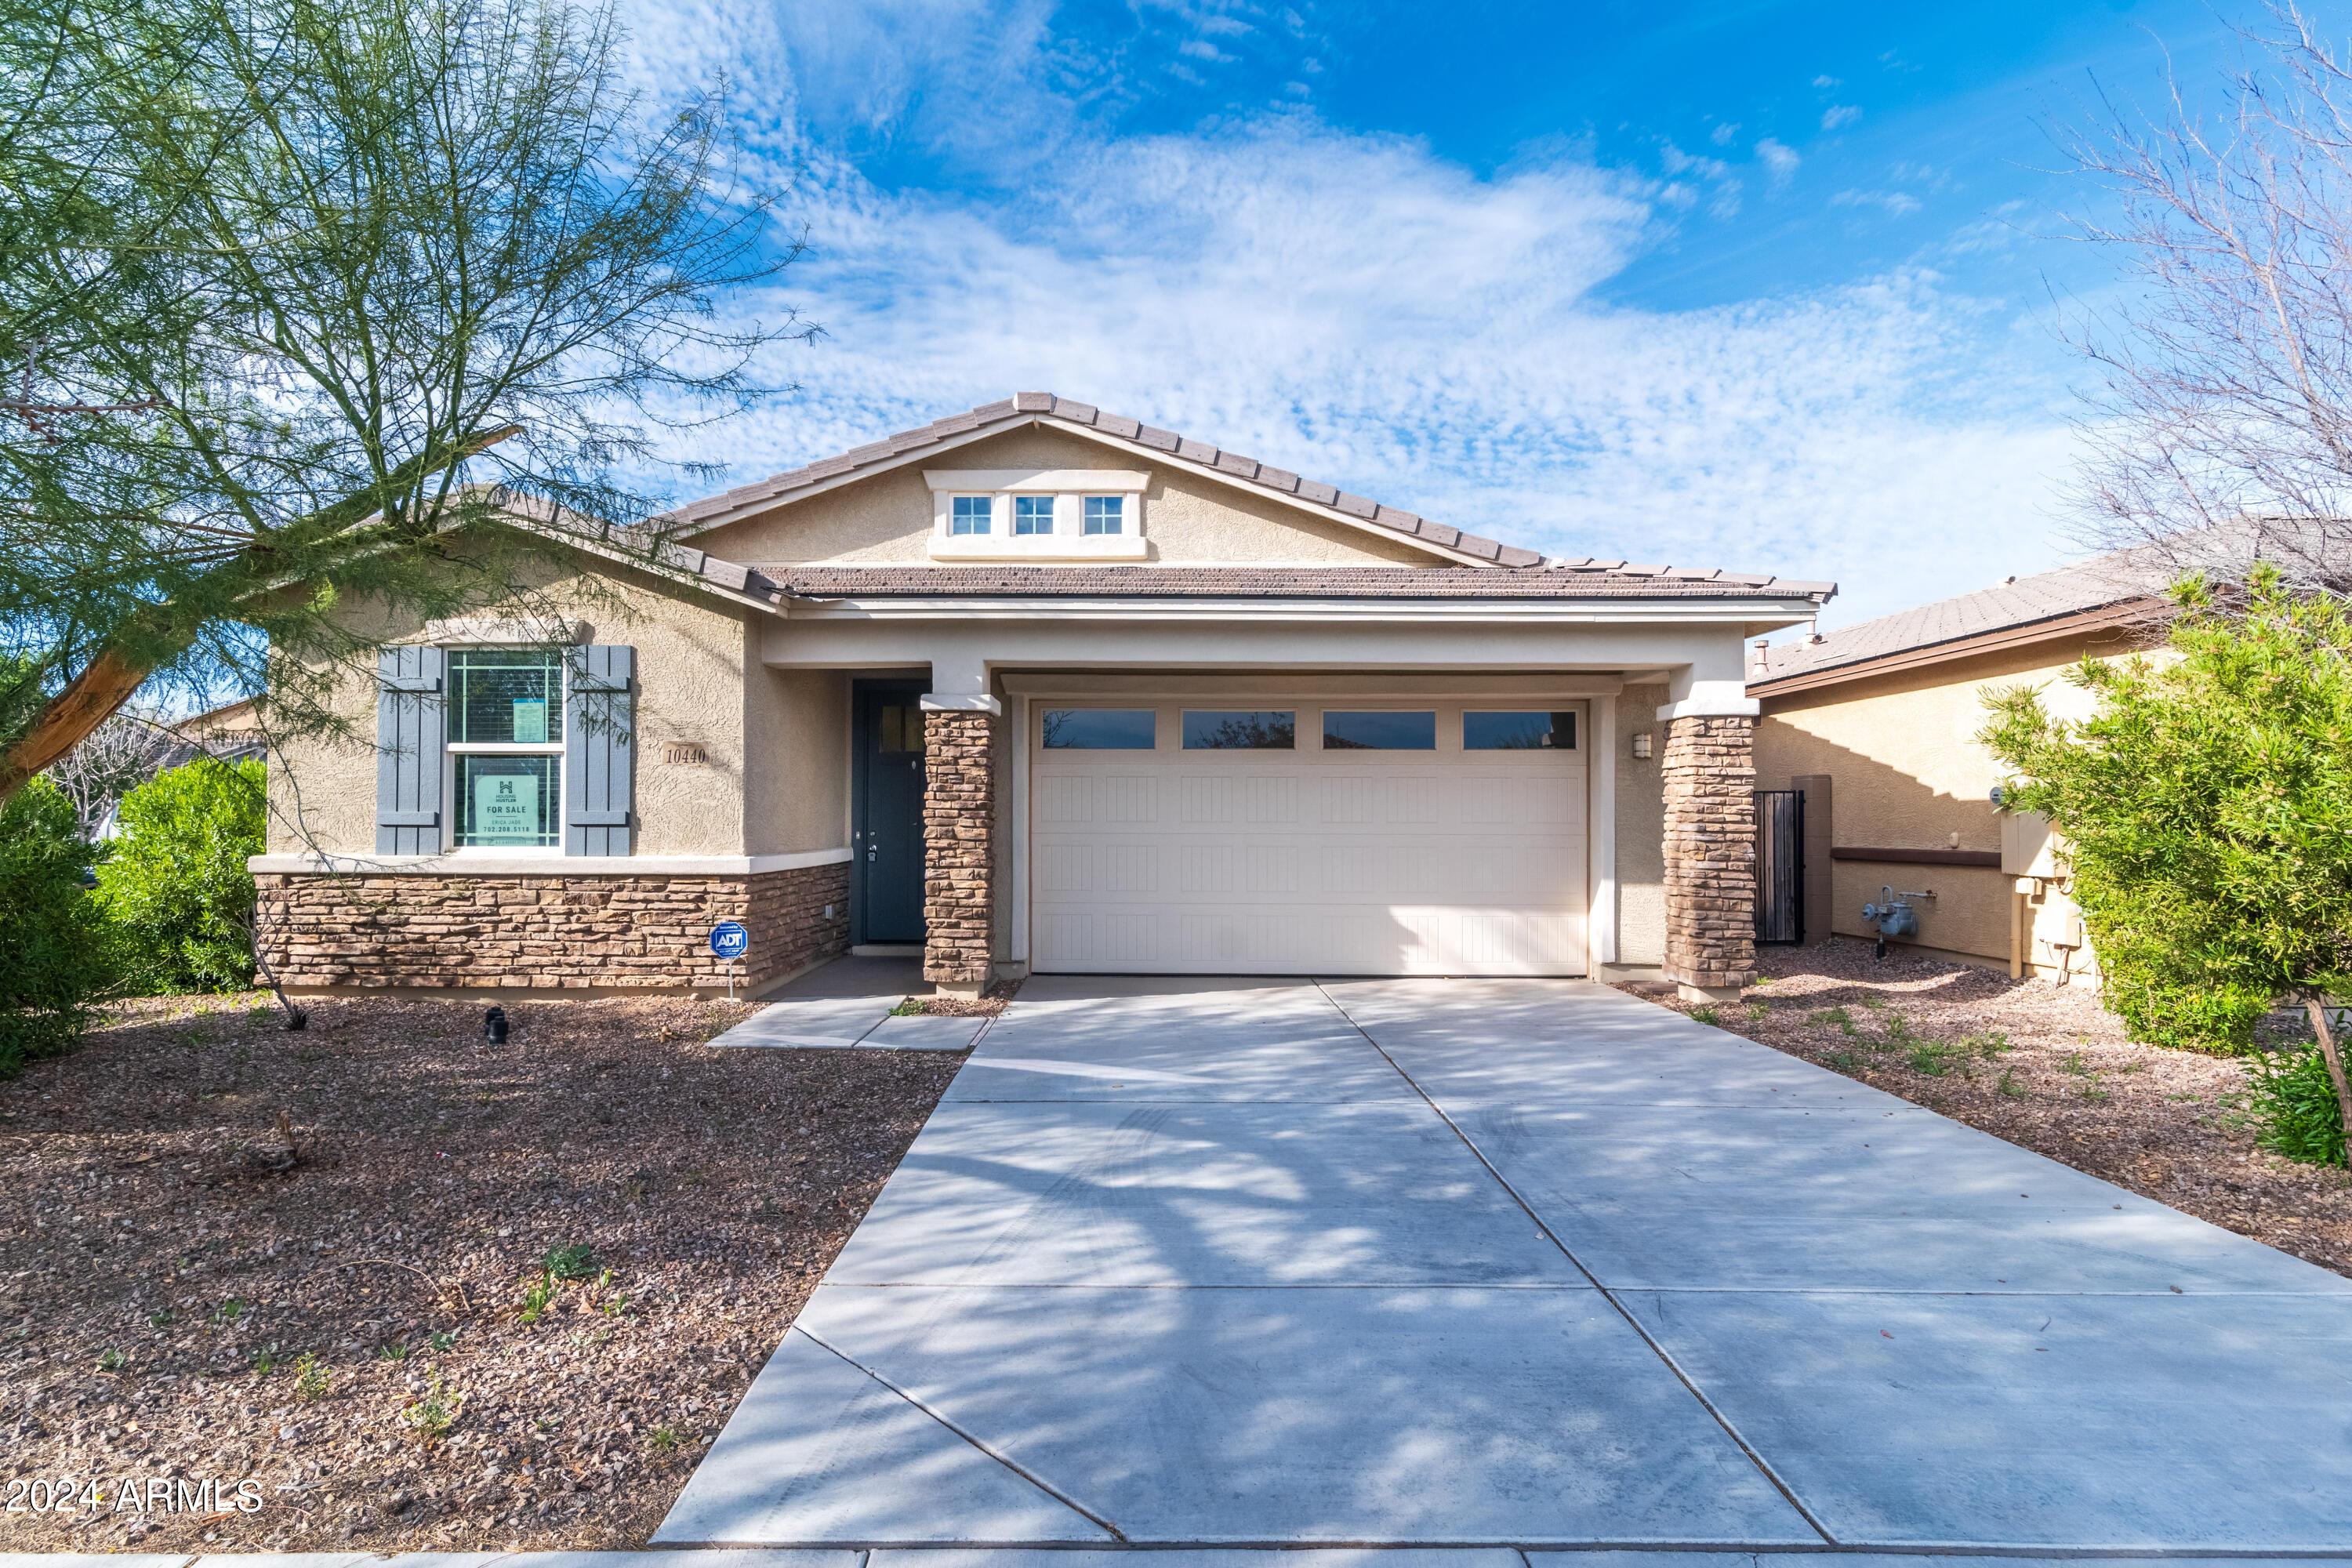 Photo one of 10440 W Papago St Tolleson AZ 85353 | MLS 6676837